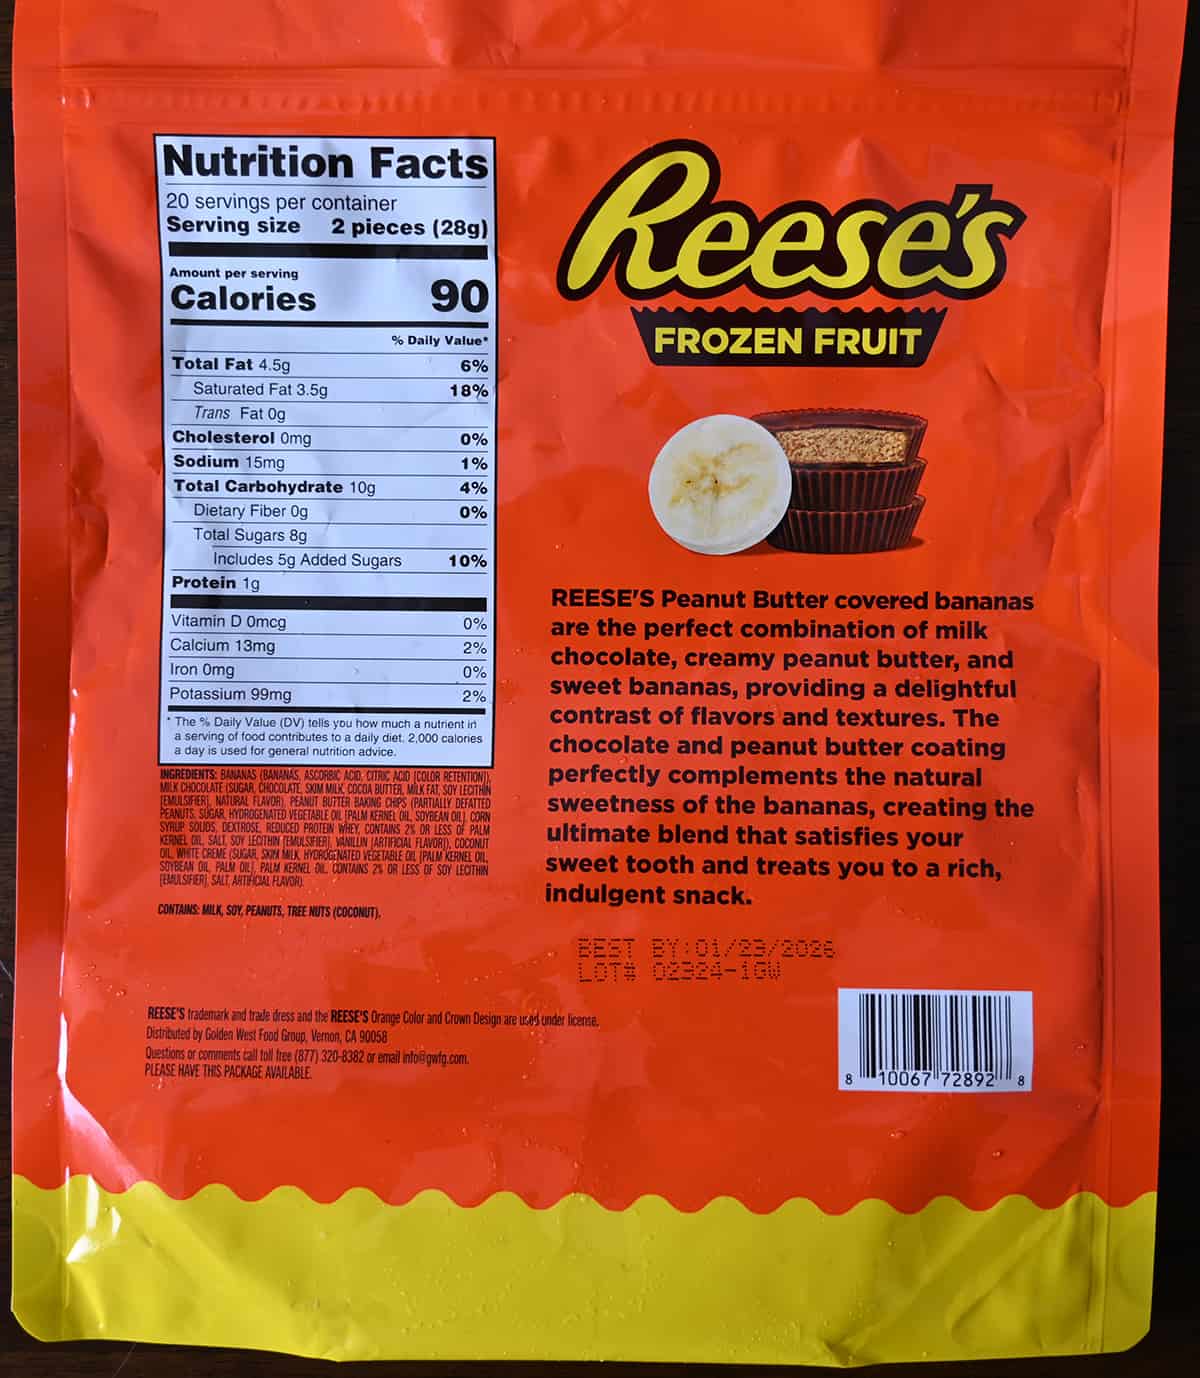 Closeup image of the back of the bag of Reese's Frozen Banana Slices showing ingredients, nutrition facts and product description. 